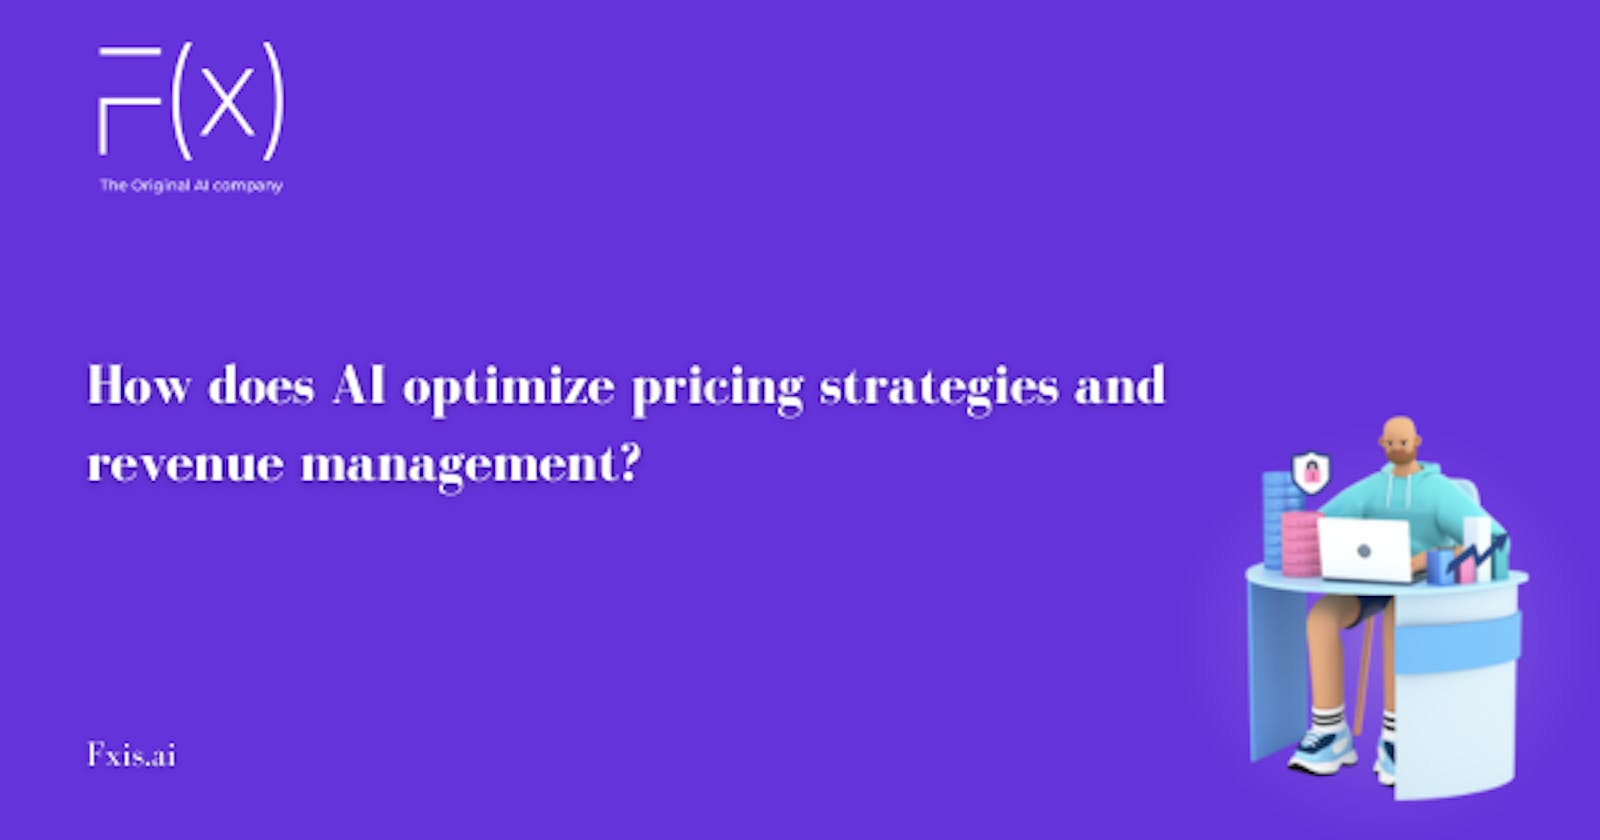 How does AI optimize pricing strategies and revenue management?